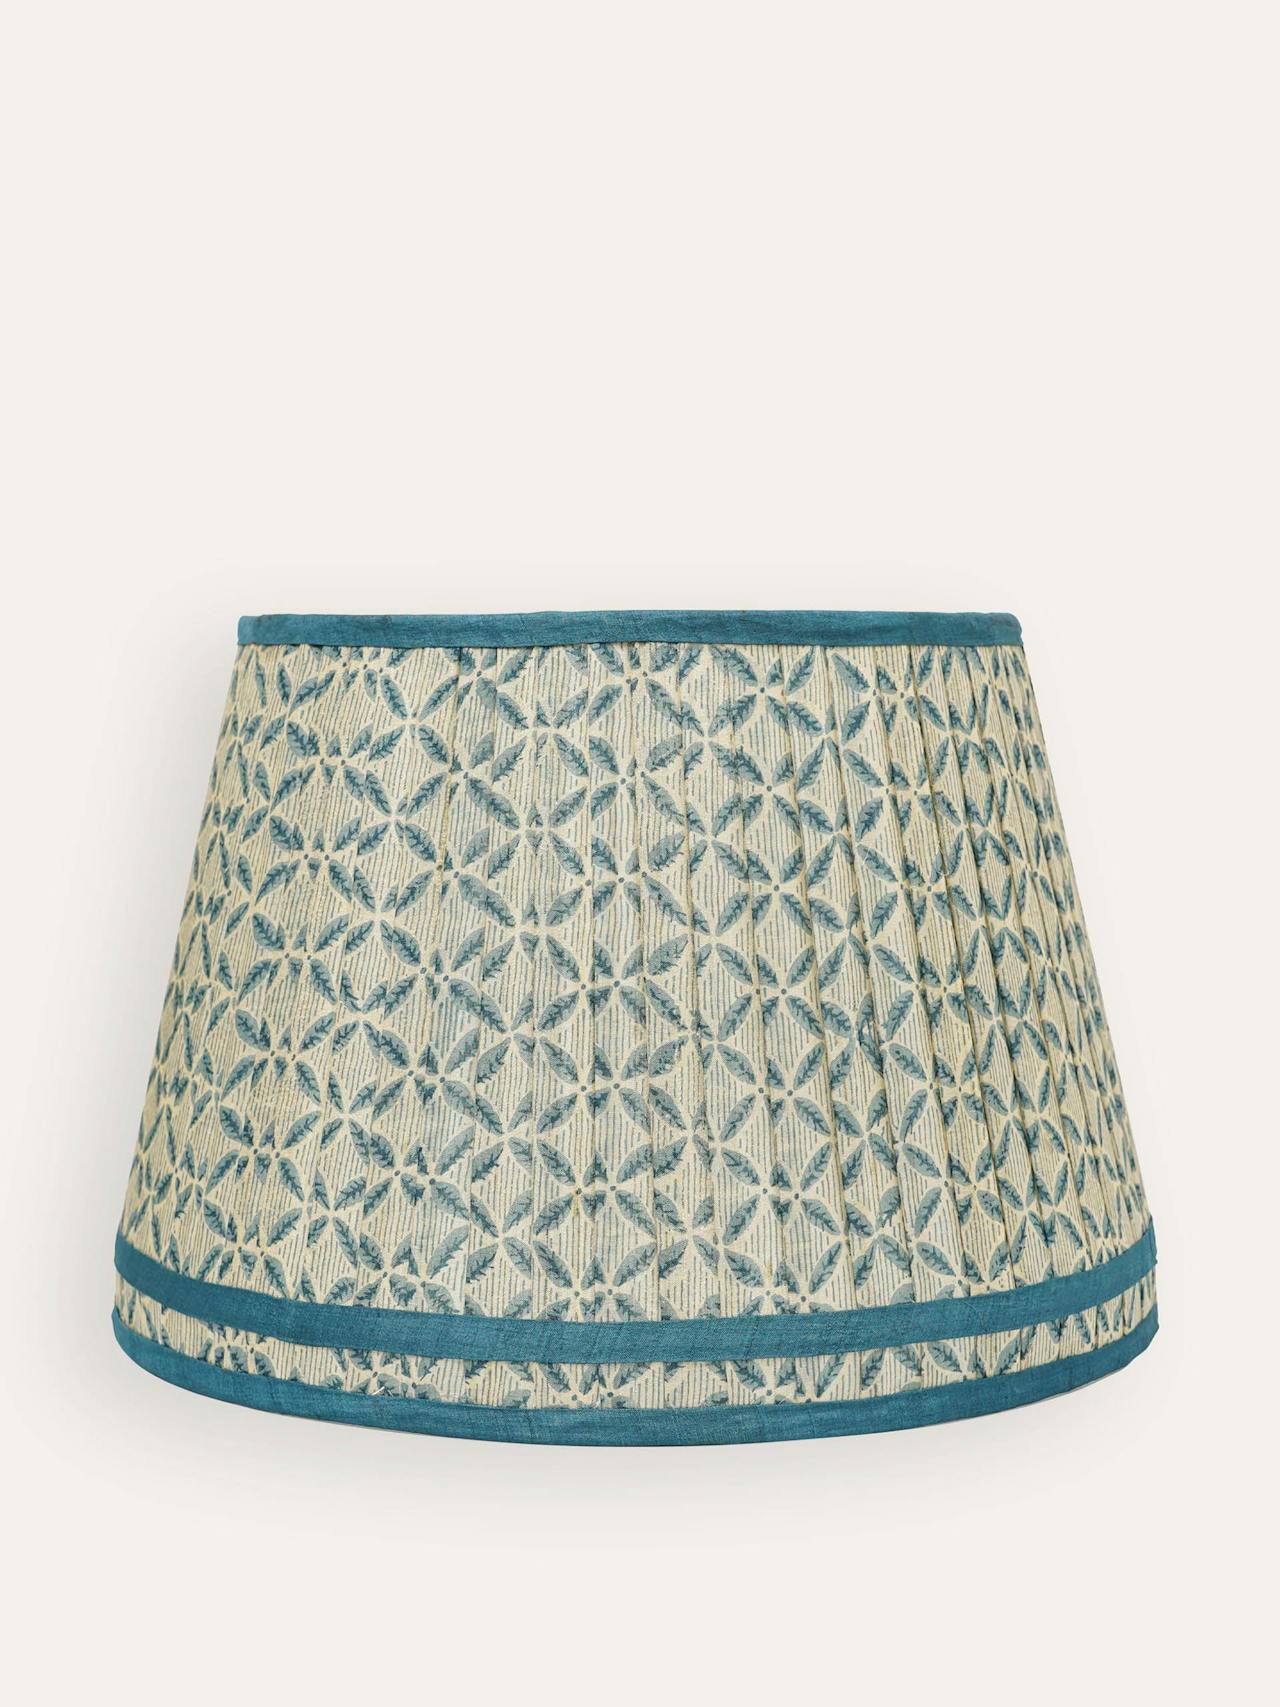 Blue Trellis pleated silk double band lampshade